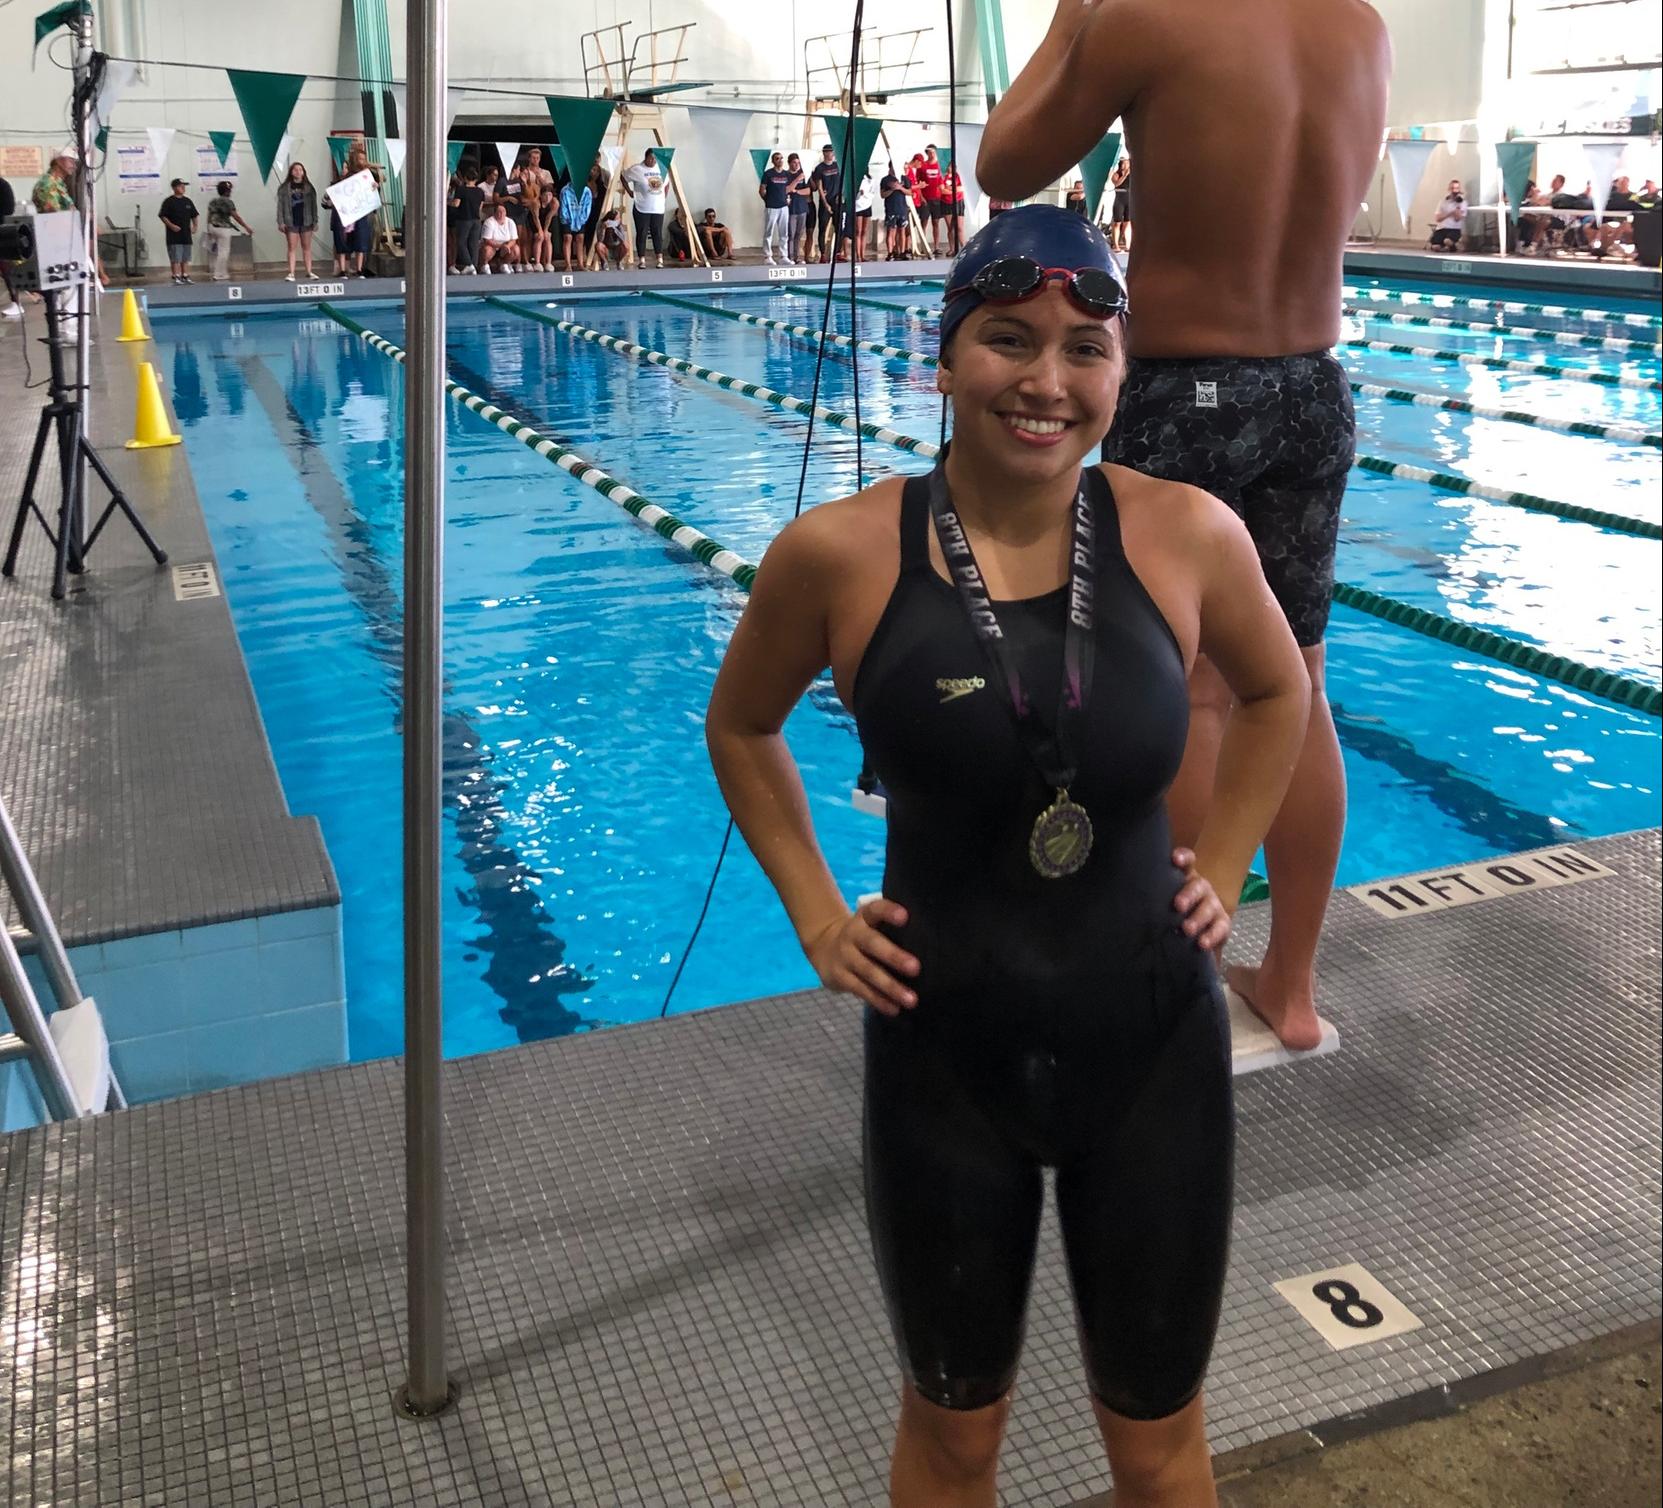 Kaya Glynn competed at the state championships